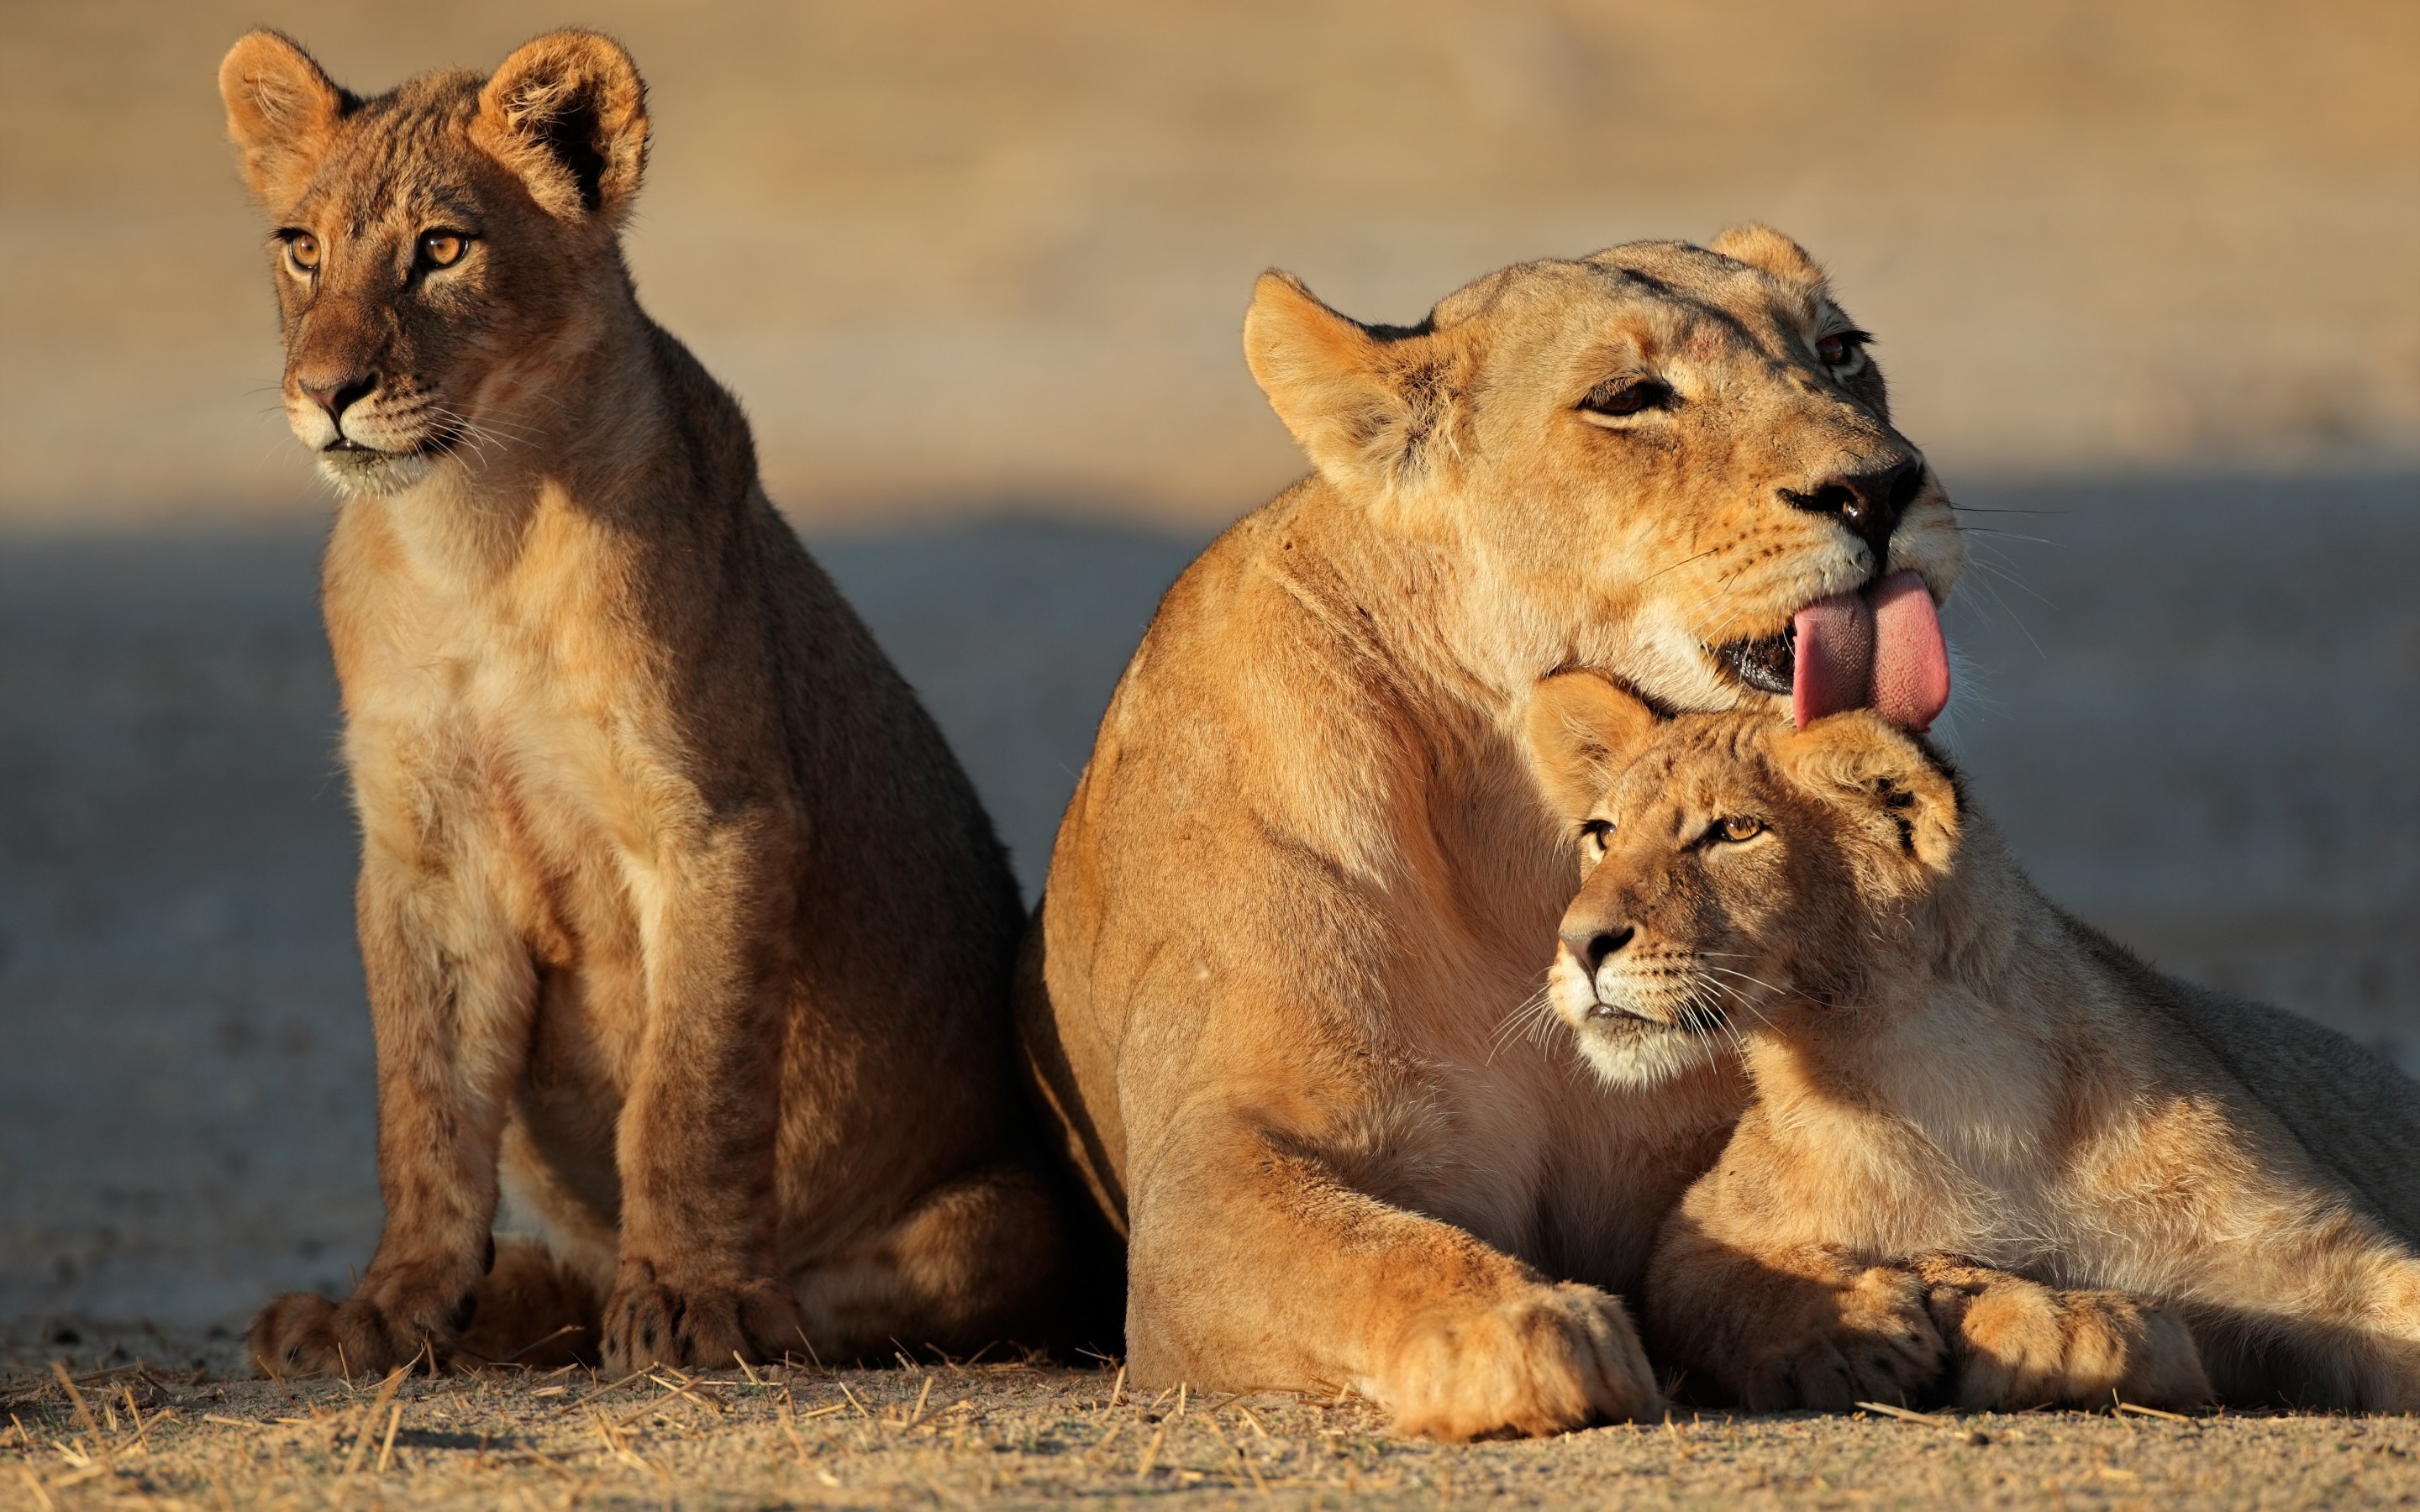 Young Lion Family for 2880 x 1800 Retina Display resolution